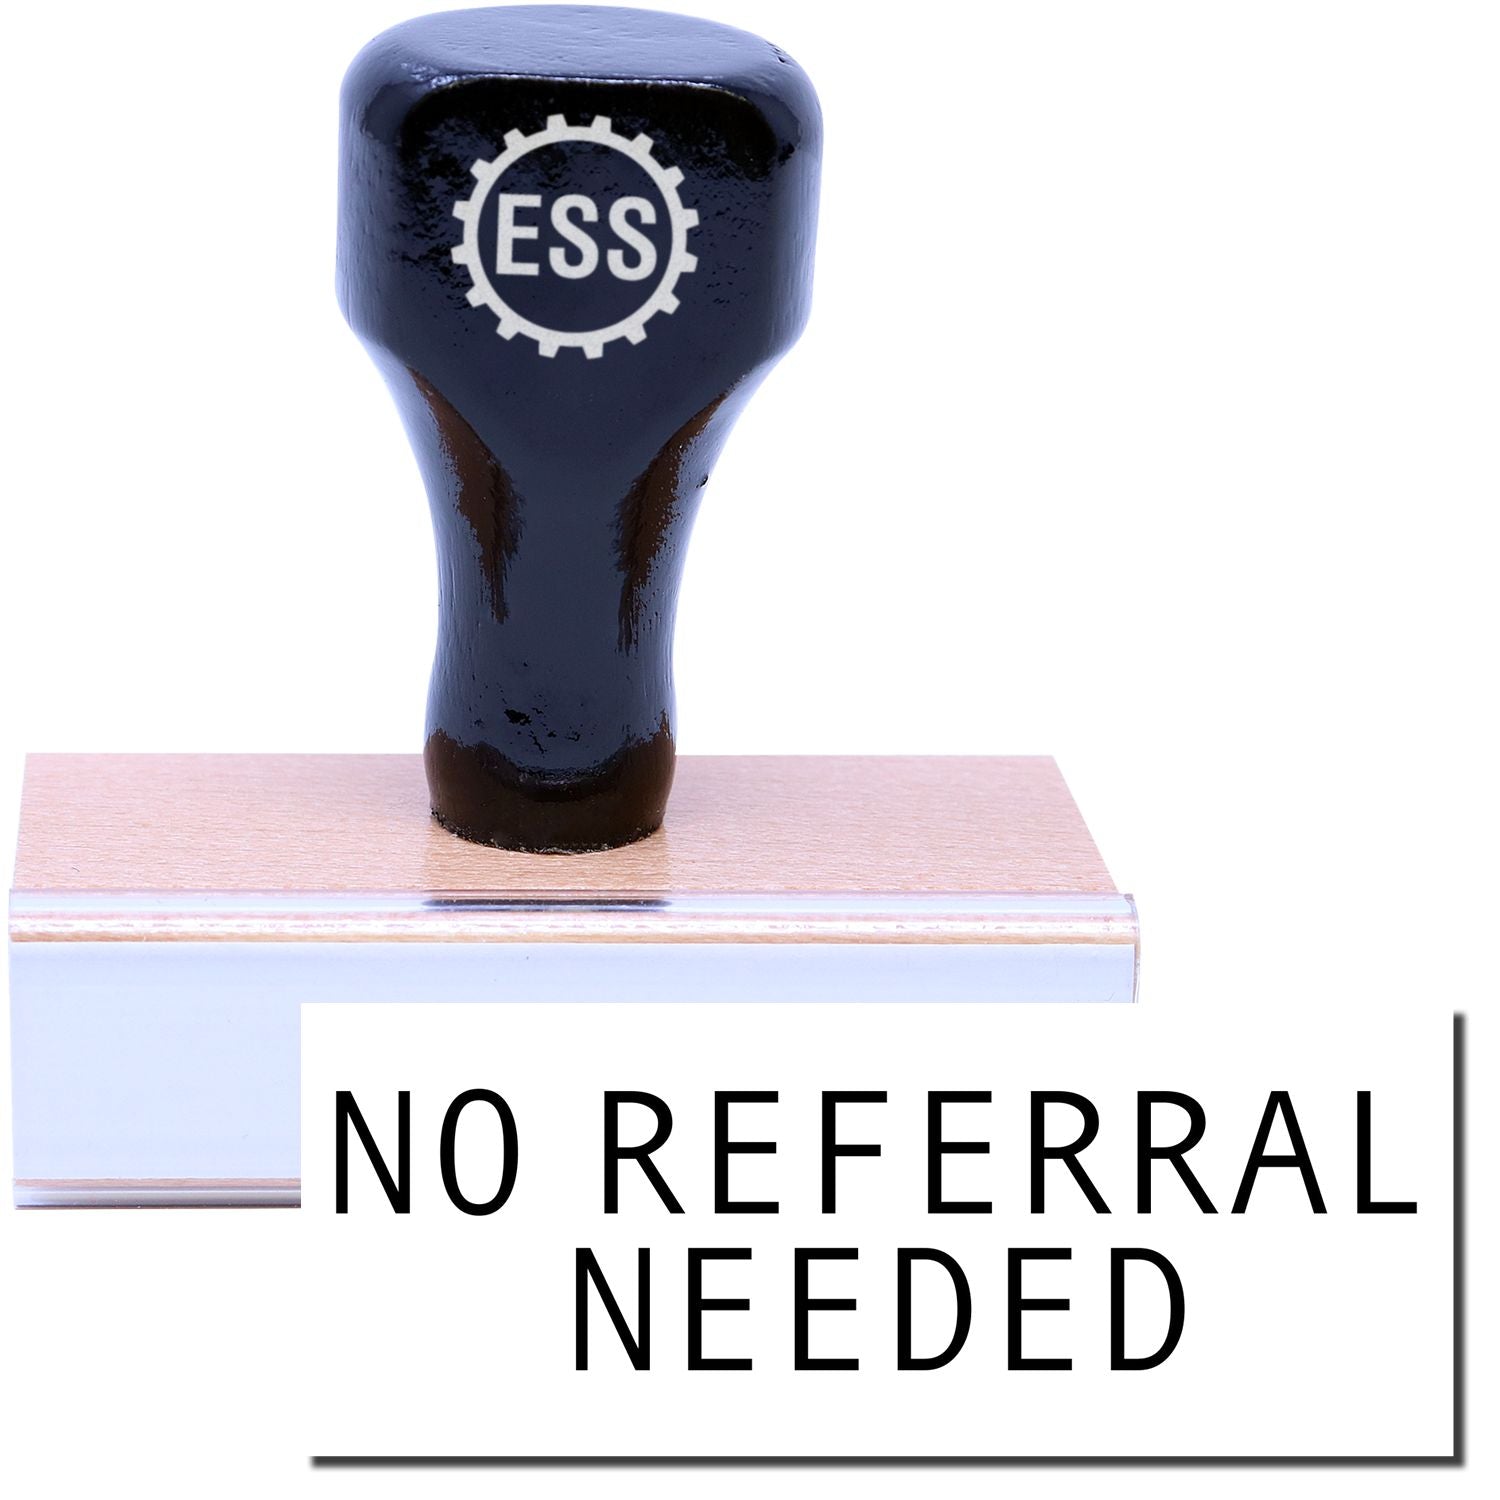 A stock office rubber stamp with a stamped image showing how the text "NO REFERRAL NEEDED" is displayed after stamping.